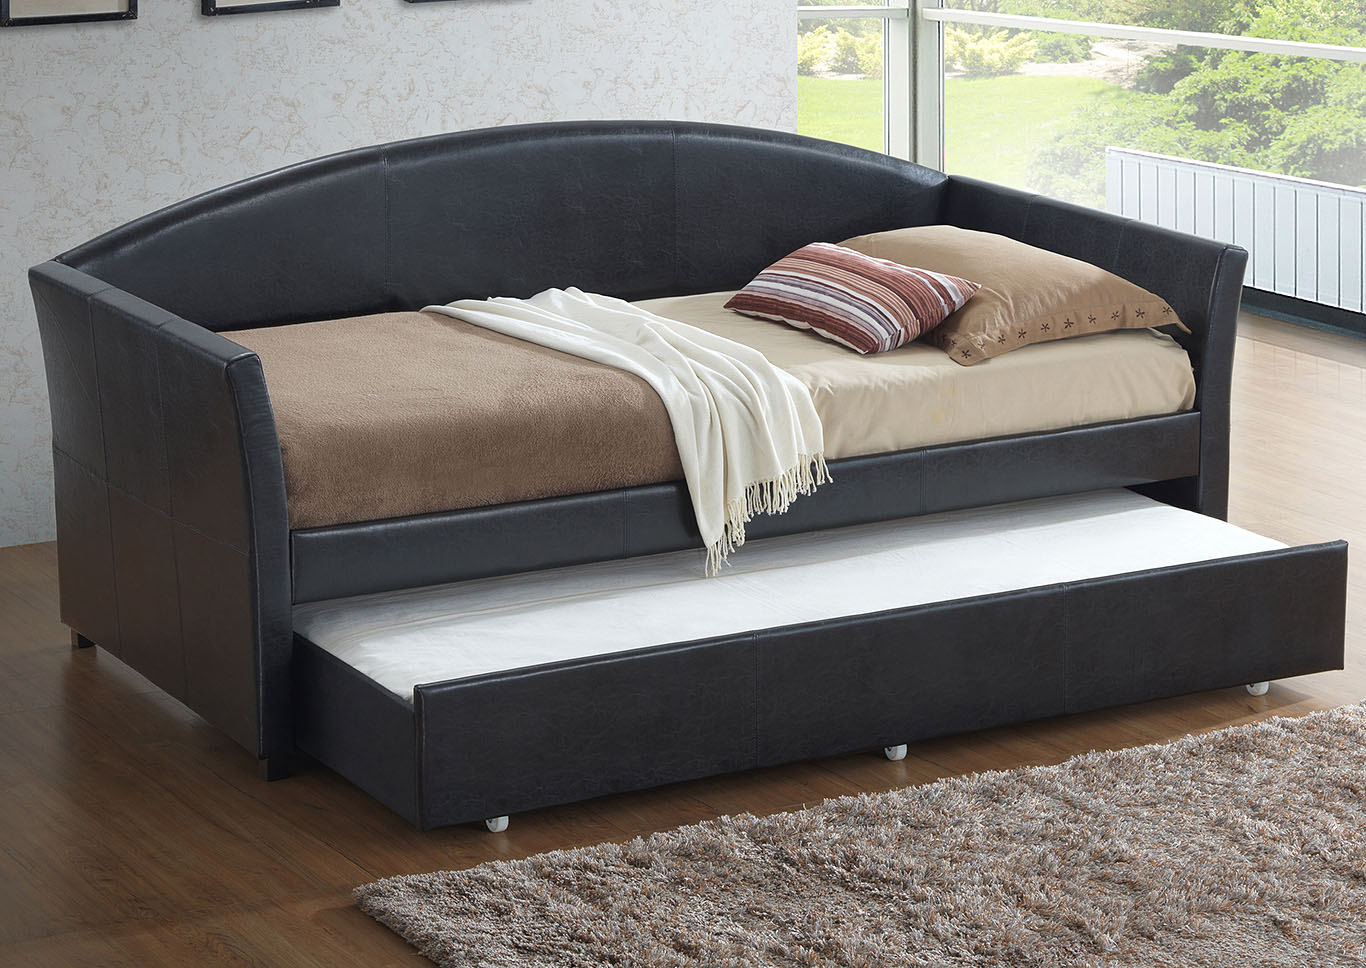 Black Day Bed,Glory Furniture